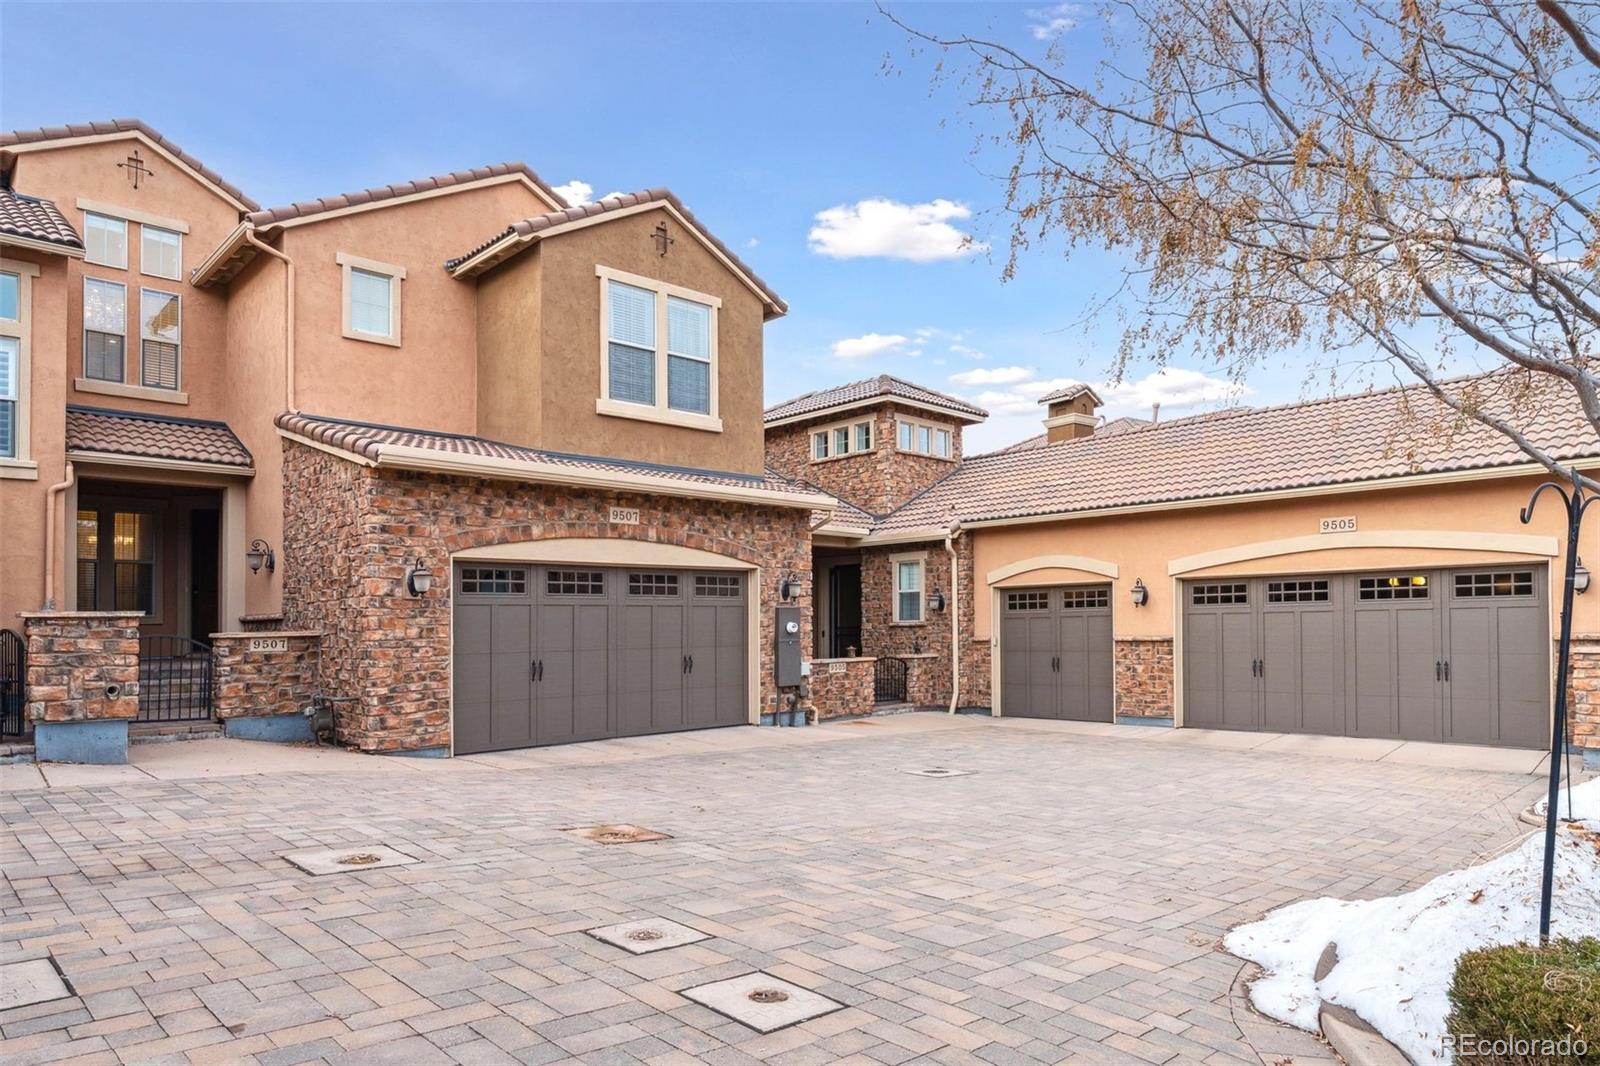 9507  pendio court, Highlands Ranch sold home. Closed on 2024-02-29 for $958,000.